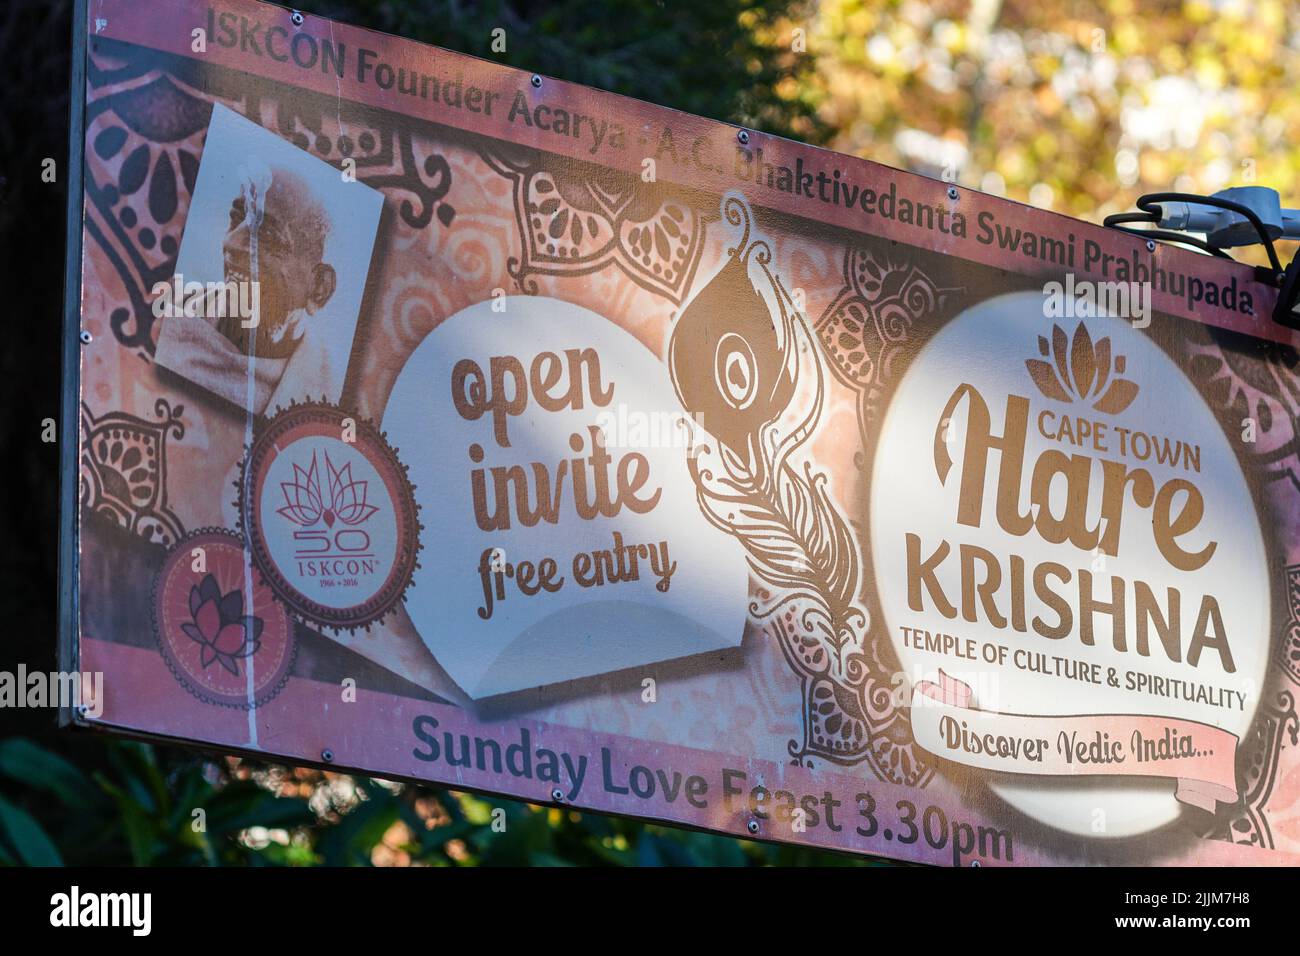 Hare Krishna signboard or signage inviting people to experience a new cultural spirituality in Cape Town, South Africa Stock Photo